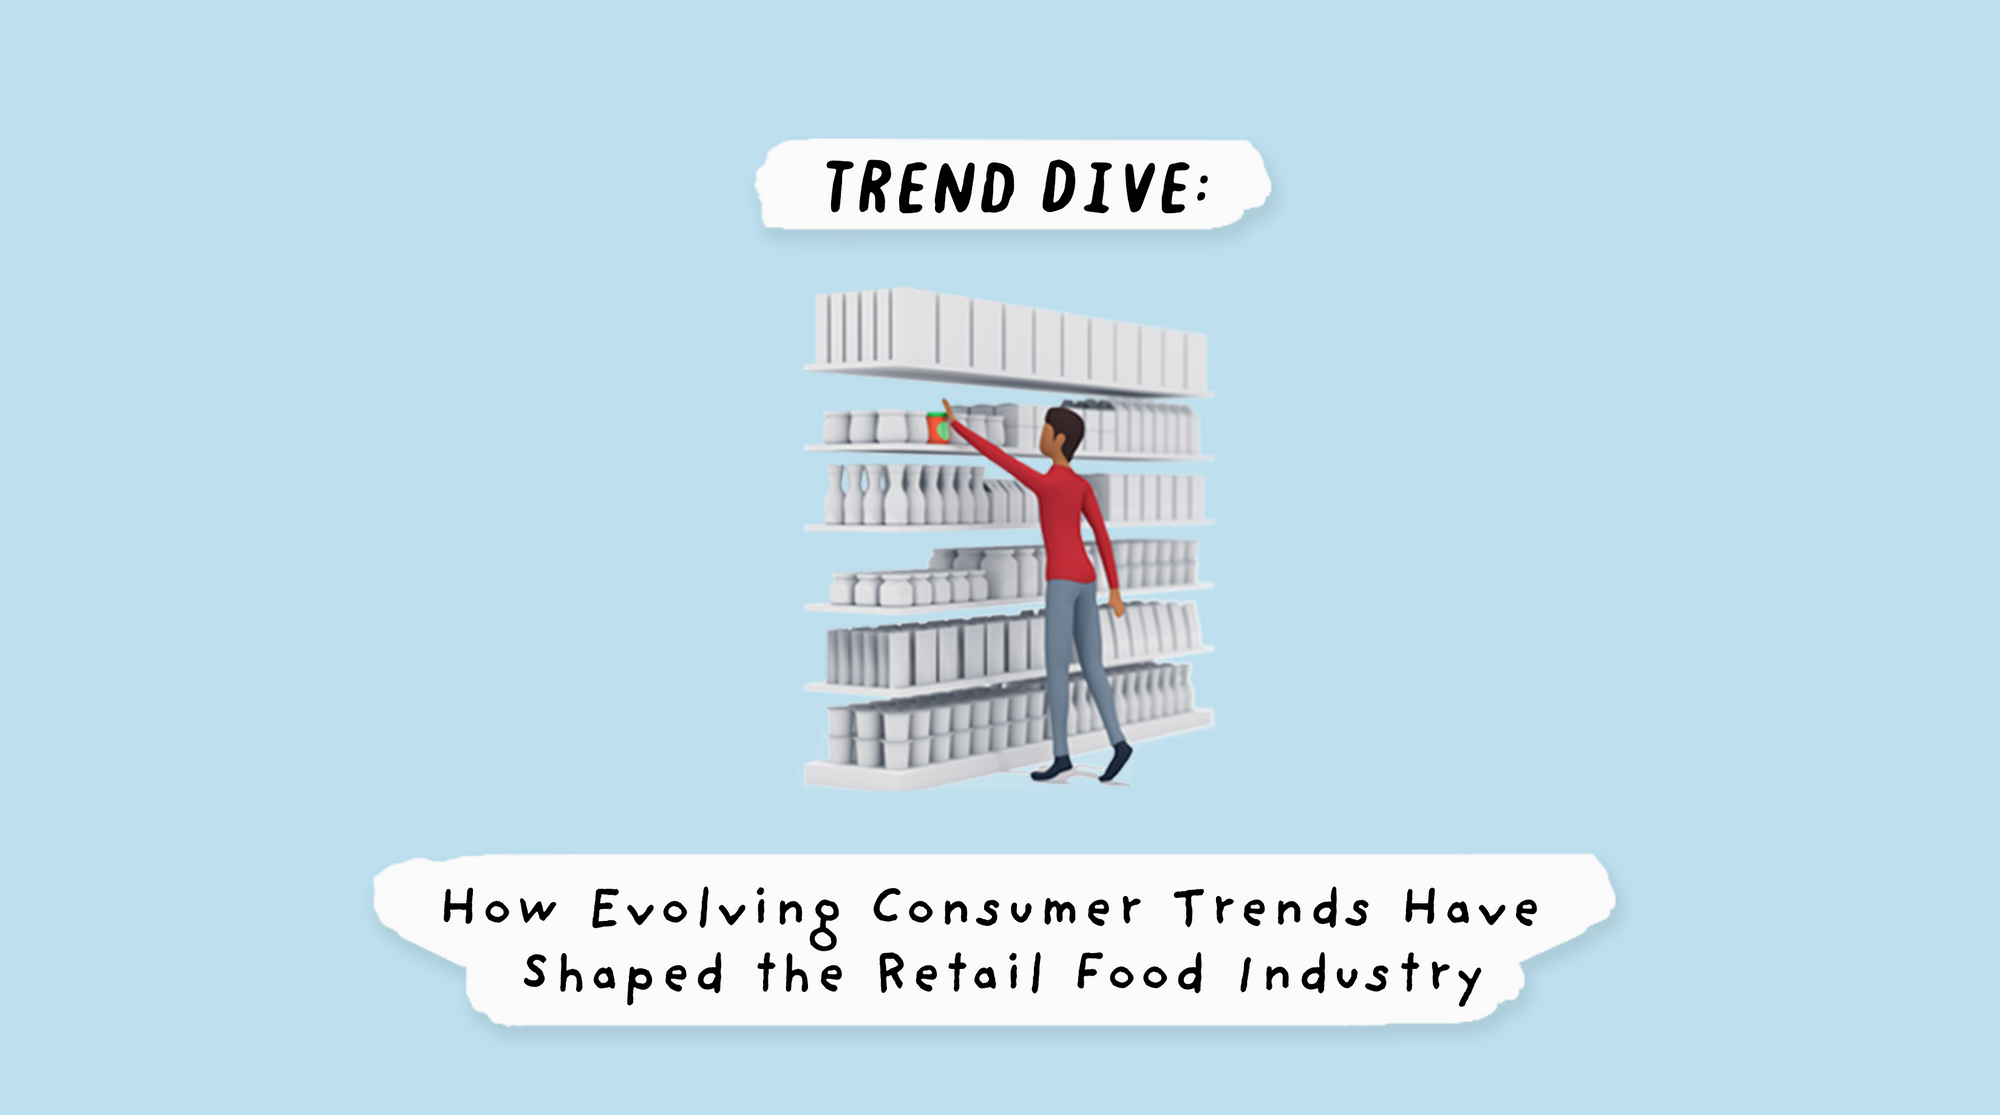 Trend Dive: How Evolving Consumer Trends Have Shaped the Retail Food Industry